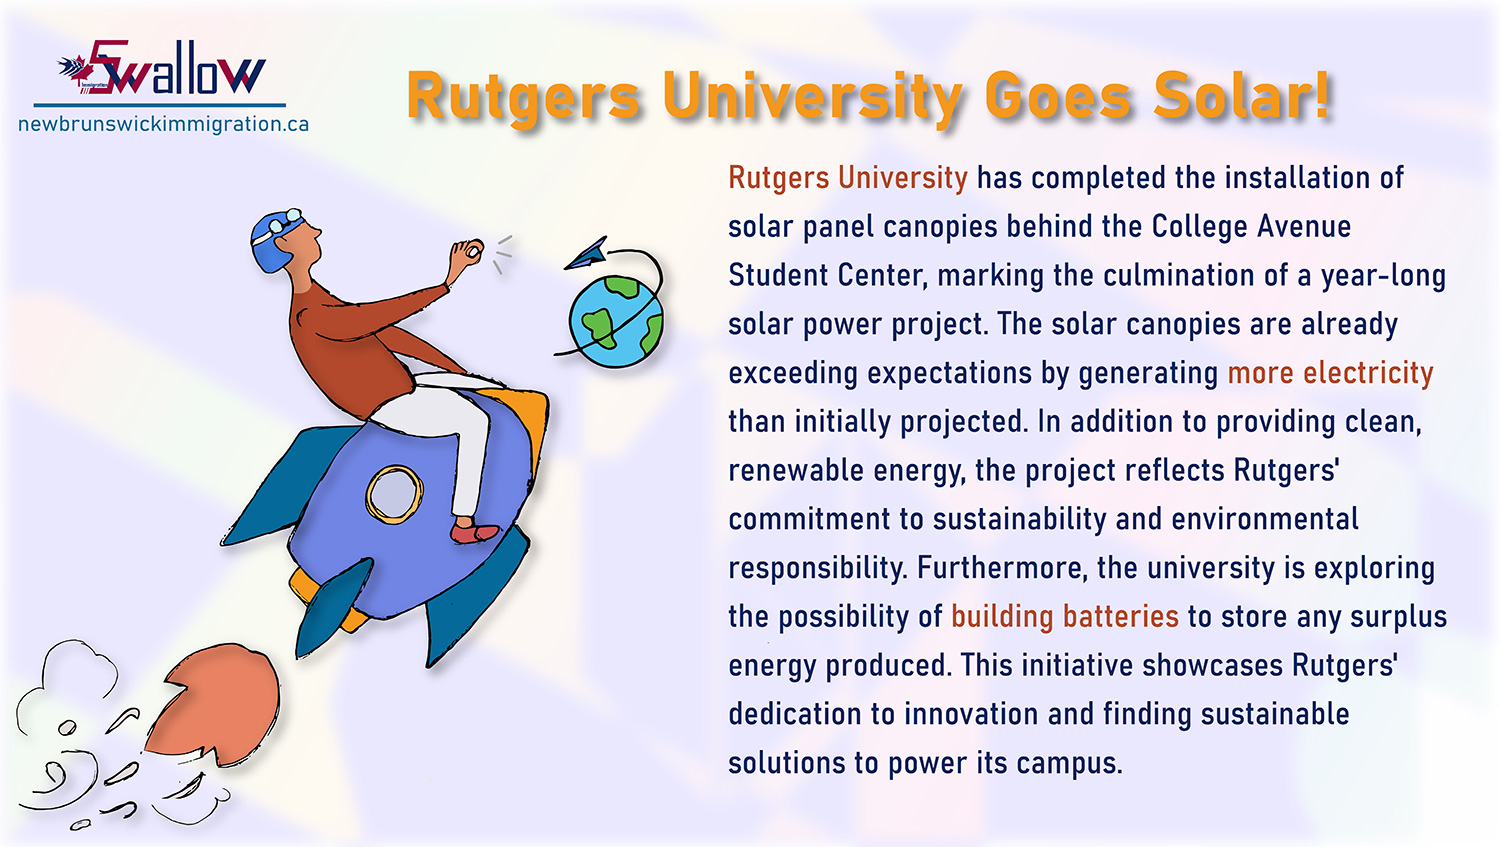 the newly-installed solar panel canopie%s behind the College Avenue Student Center are officially up and running at Rutgers University!